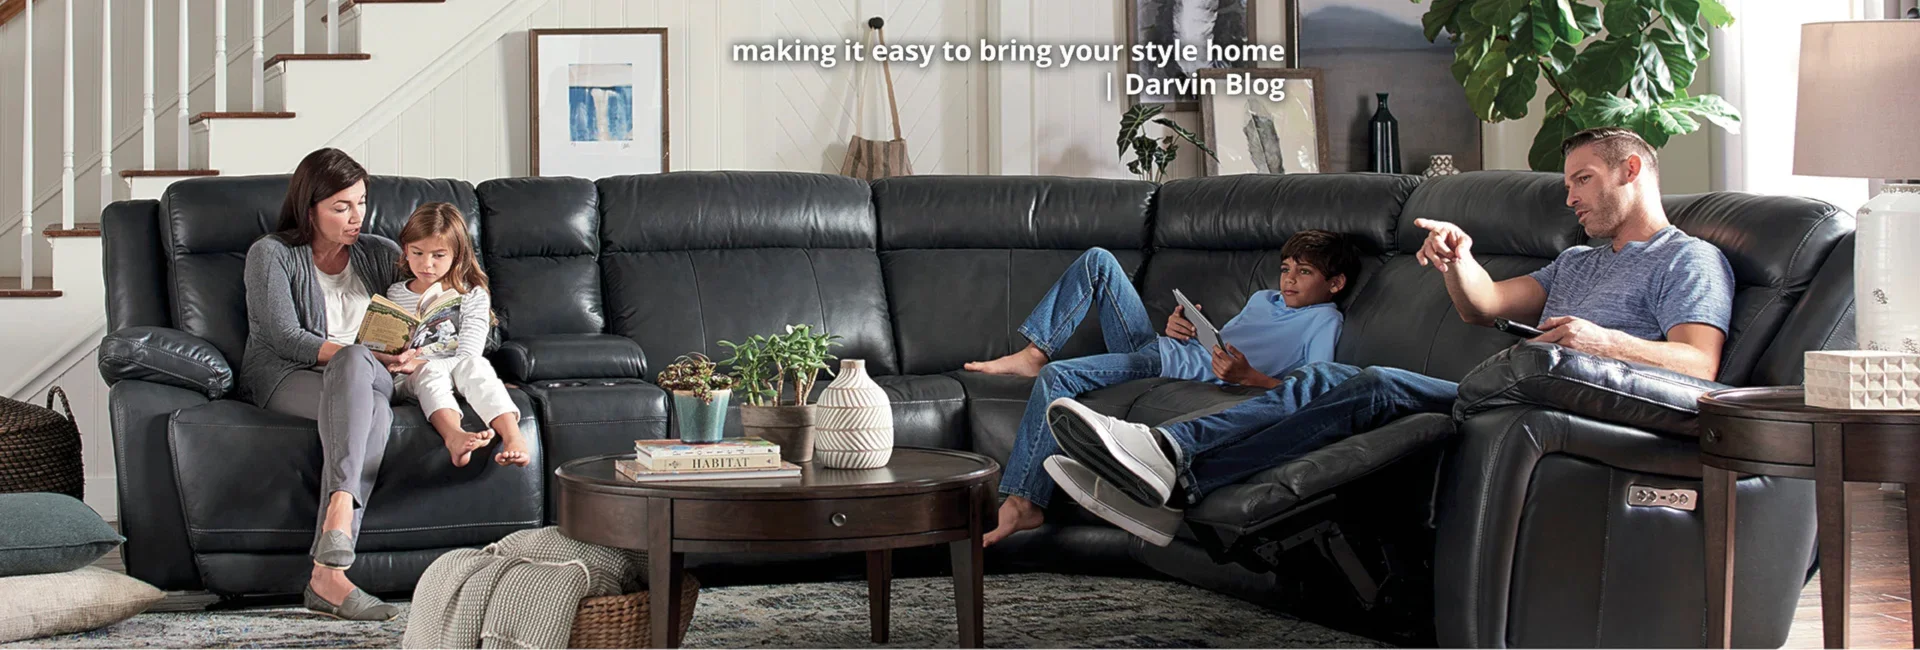 Darvin Blog - Making it easy to bring your style home with Sherrill Furniture now at Darvin